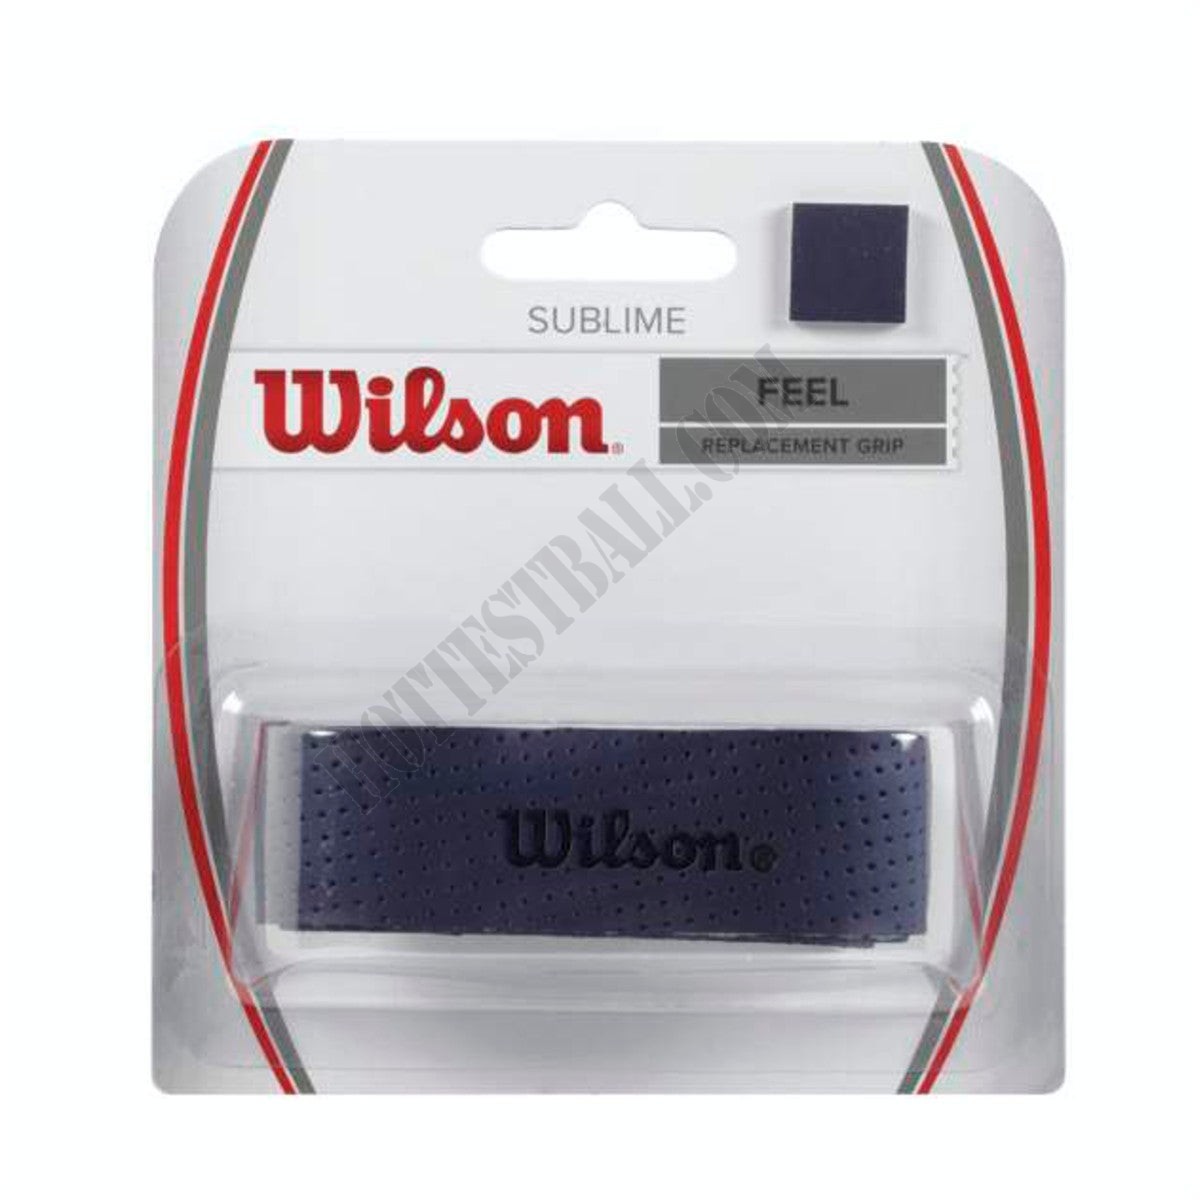 Sublime Replacement Grip - Wilson Discount Store - -3